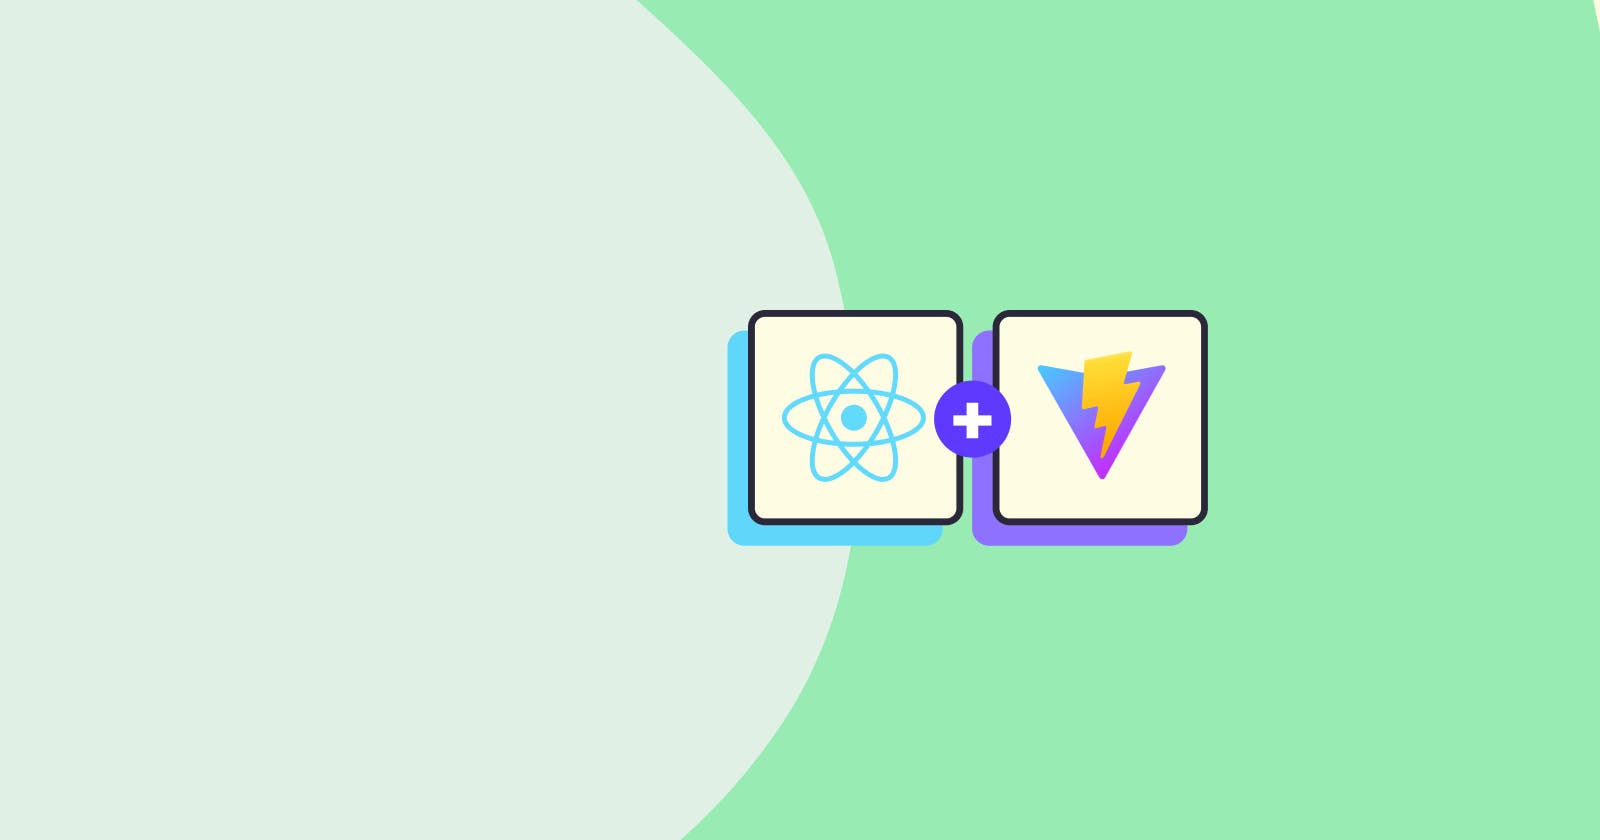 Create a new React app with Vite